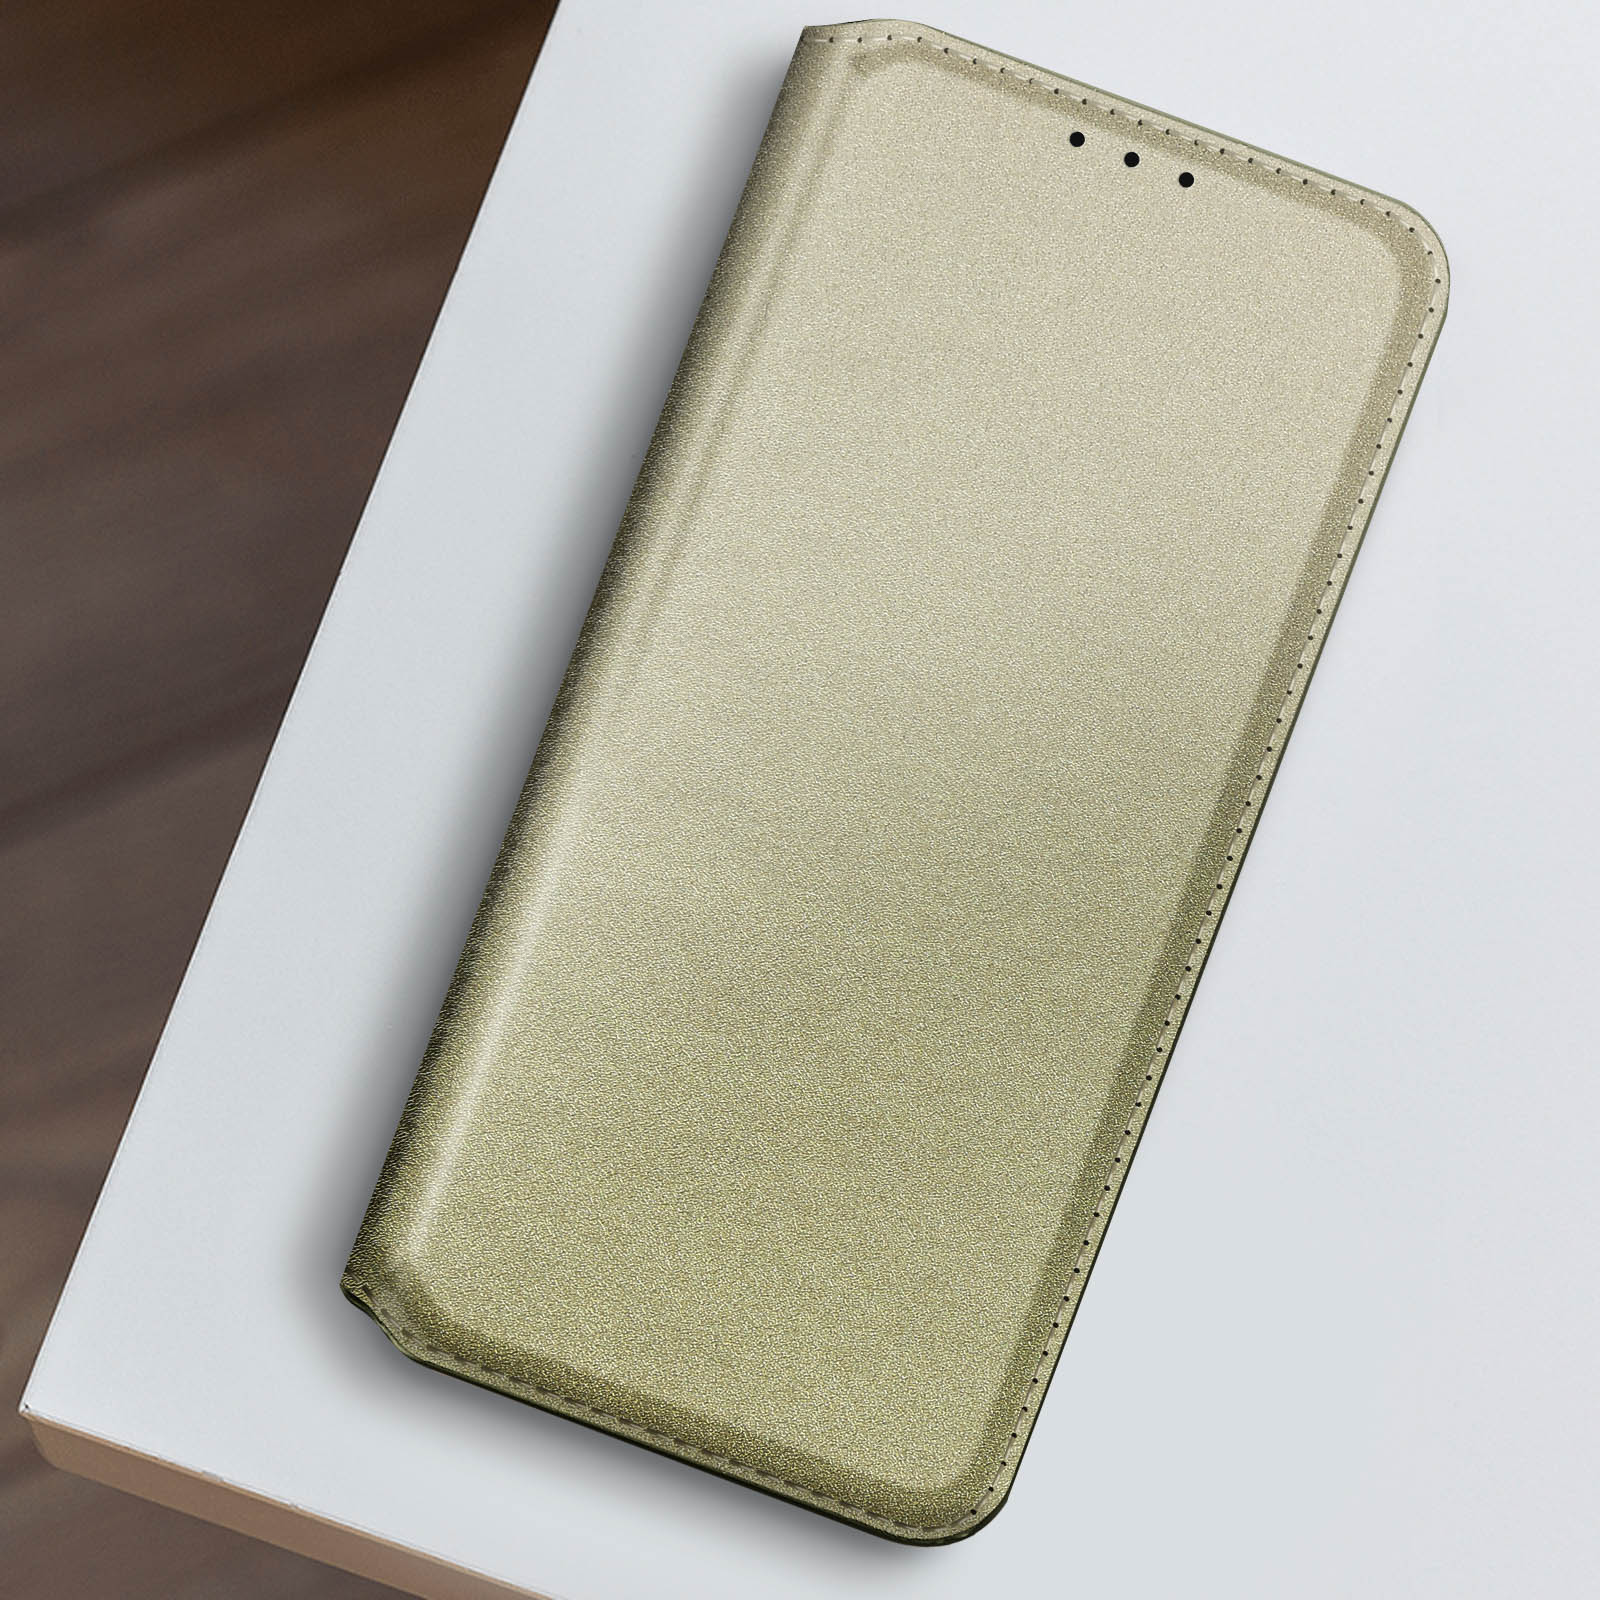 AVIZAR Classic Edition, Backcover mit 2018, Galaxy Gold Samsung, Magnetklappe Bookcover, A9 Series